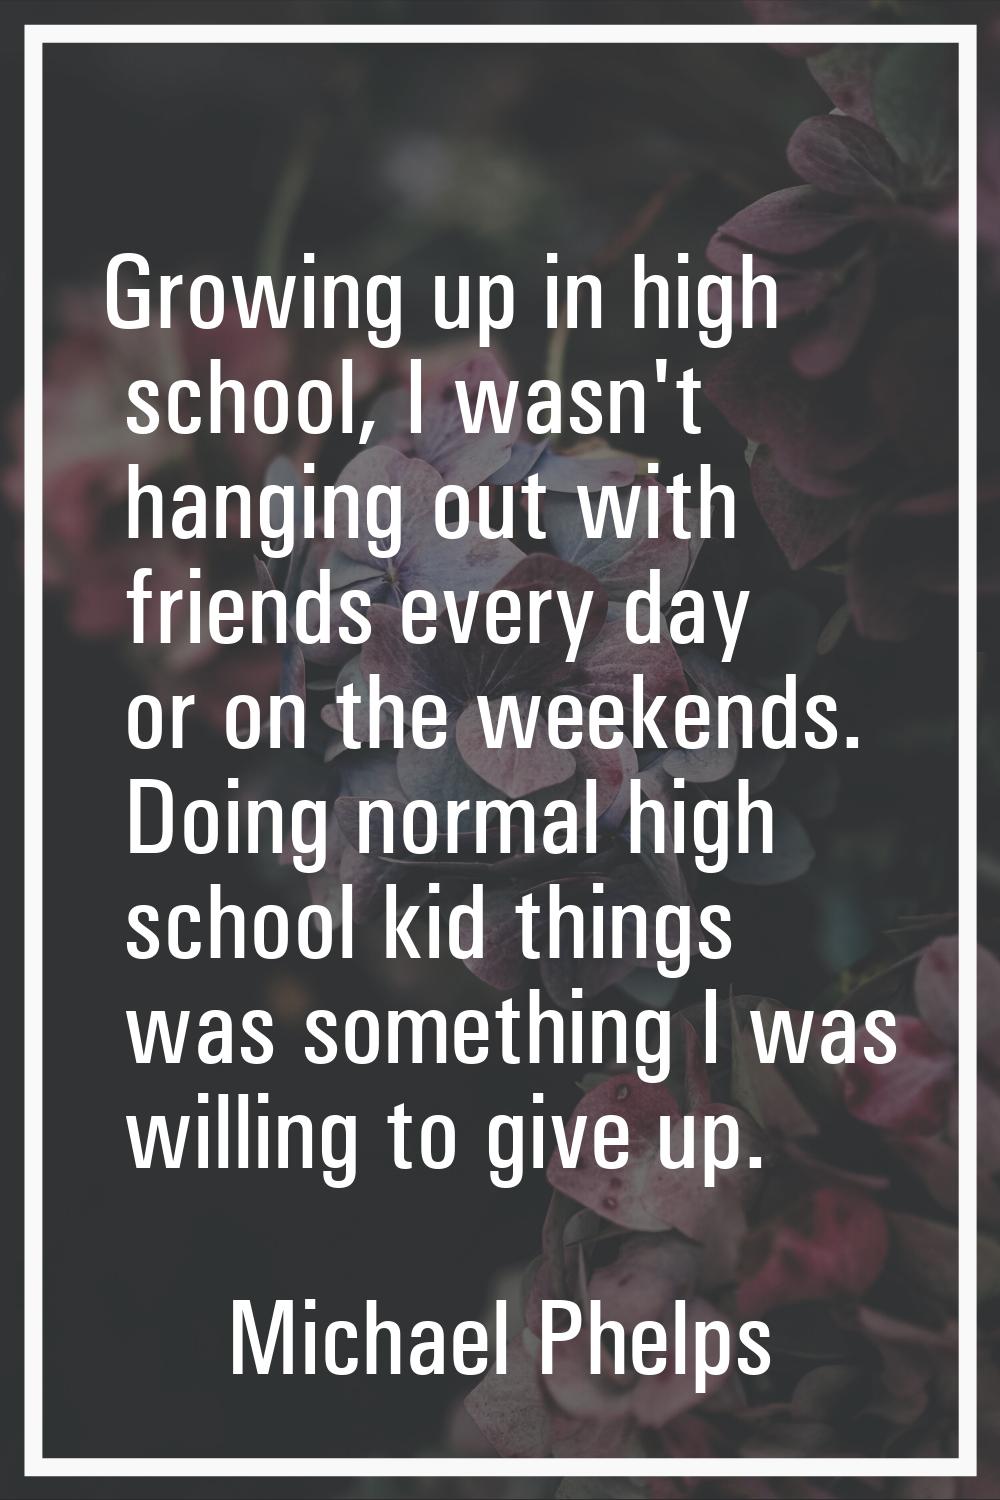 Growing up in high school, I wasn't hanging out with friends every day or on the weekends. Doing no